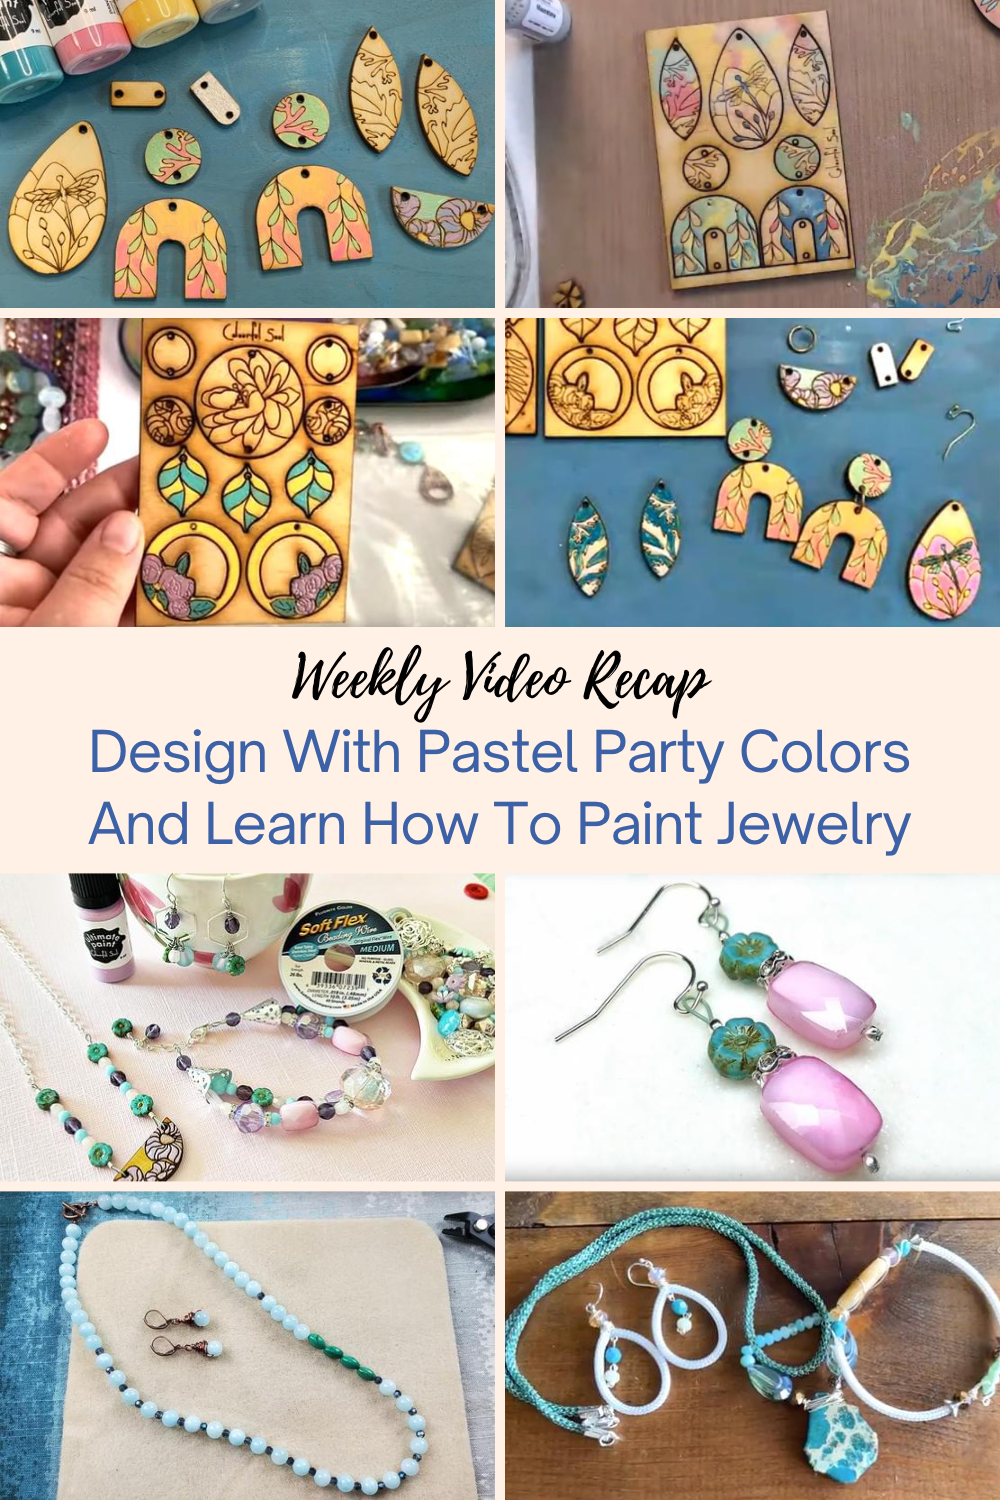 Design With Pastel Party Colors And Learn How To Paint Jewelry Collage